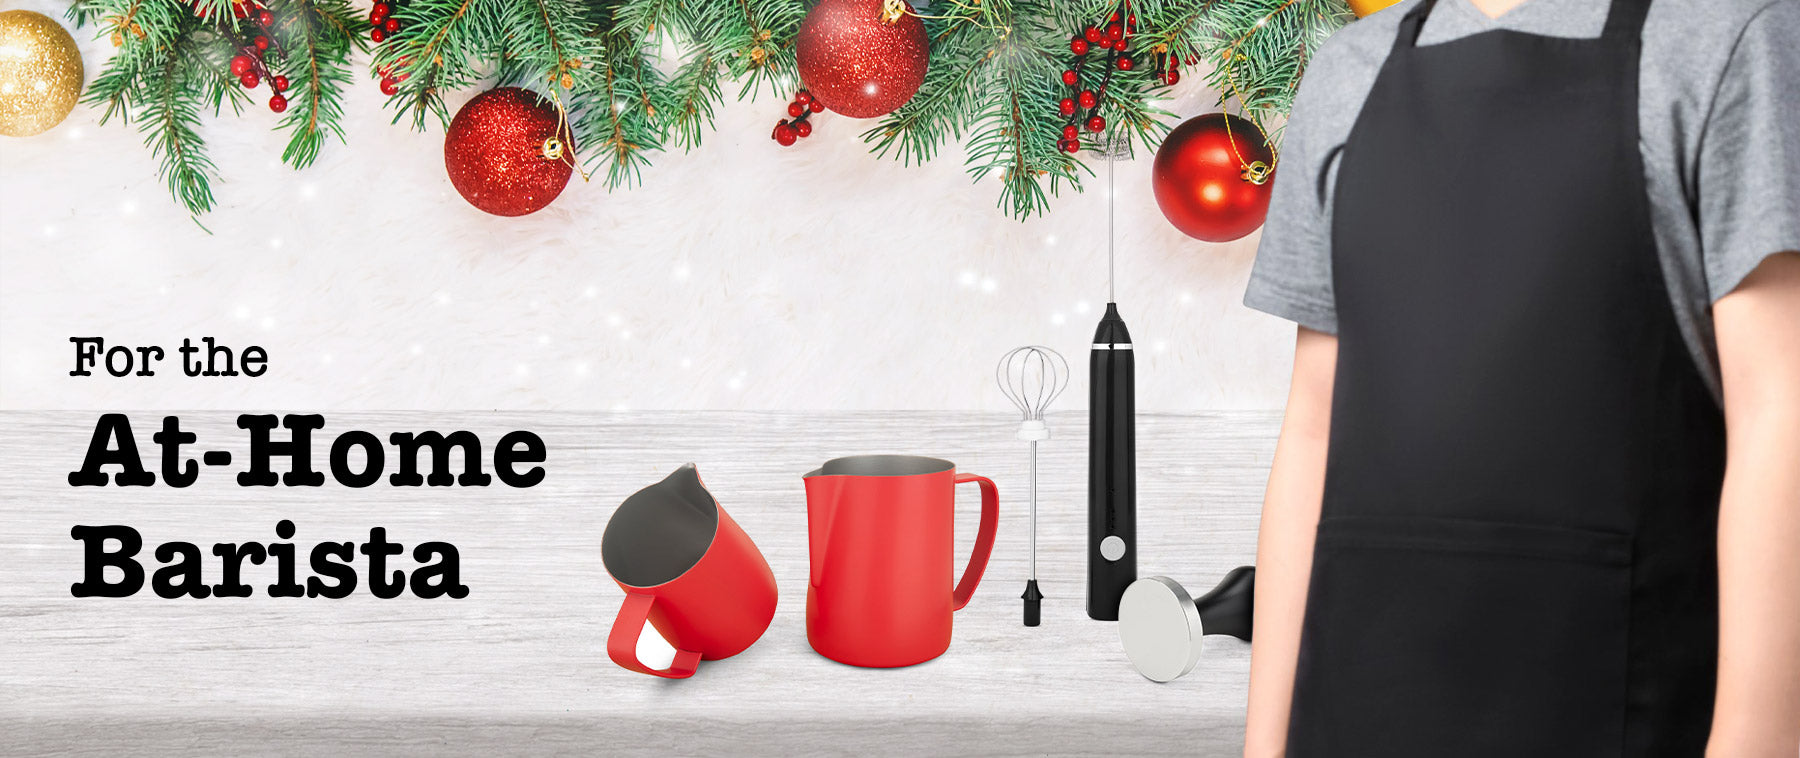 Ideal gifts for Home Baristas - EspressoWorks Holiday Gift Guide for Coffee Lovers